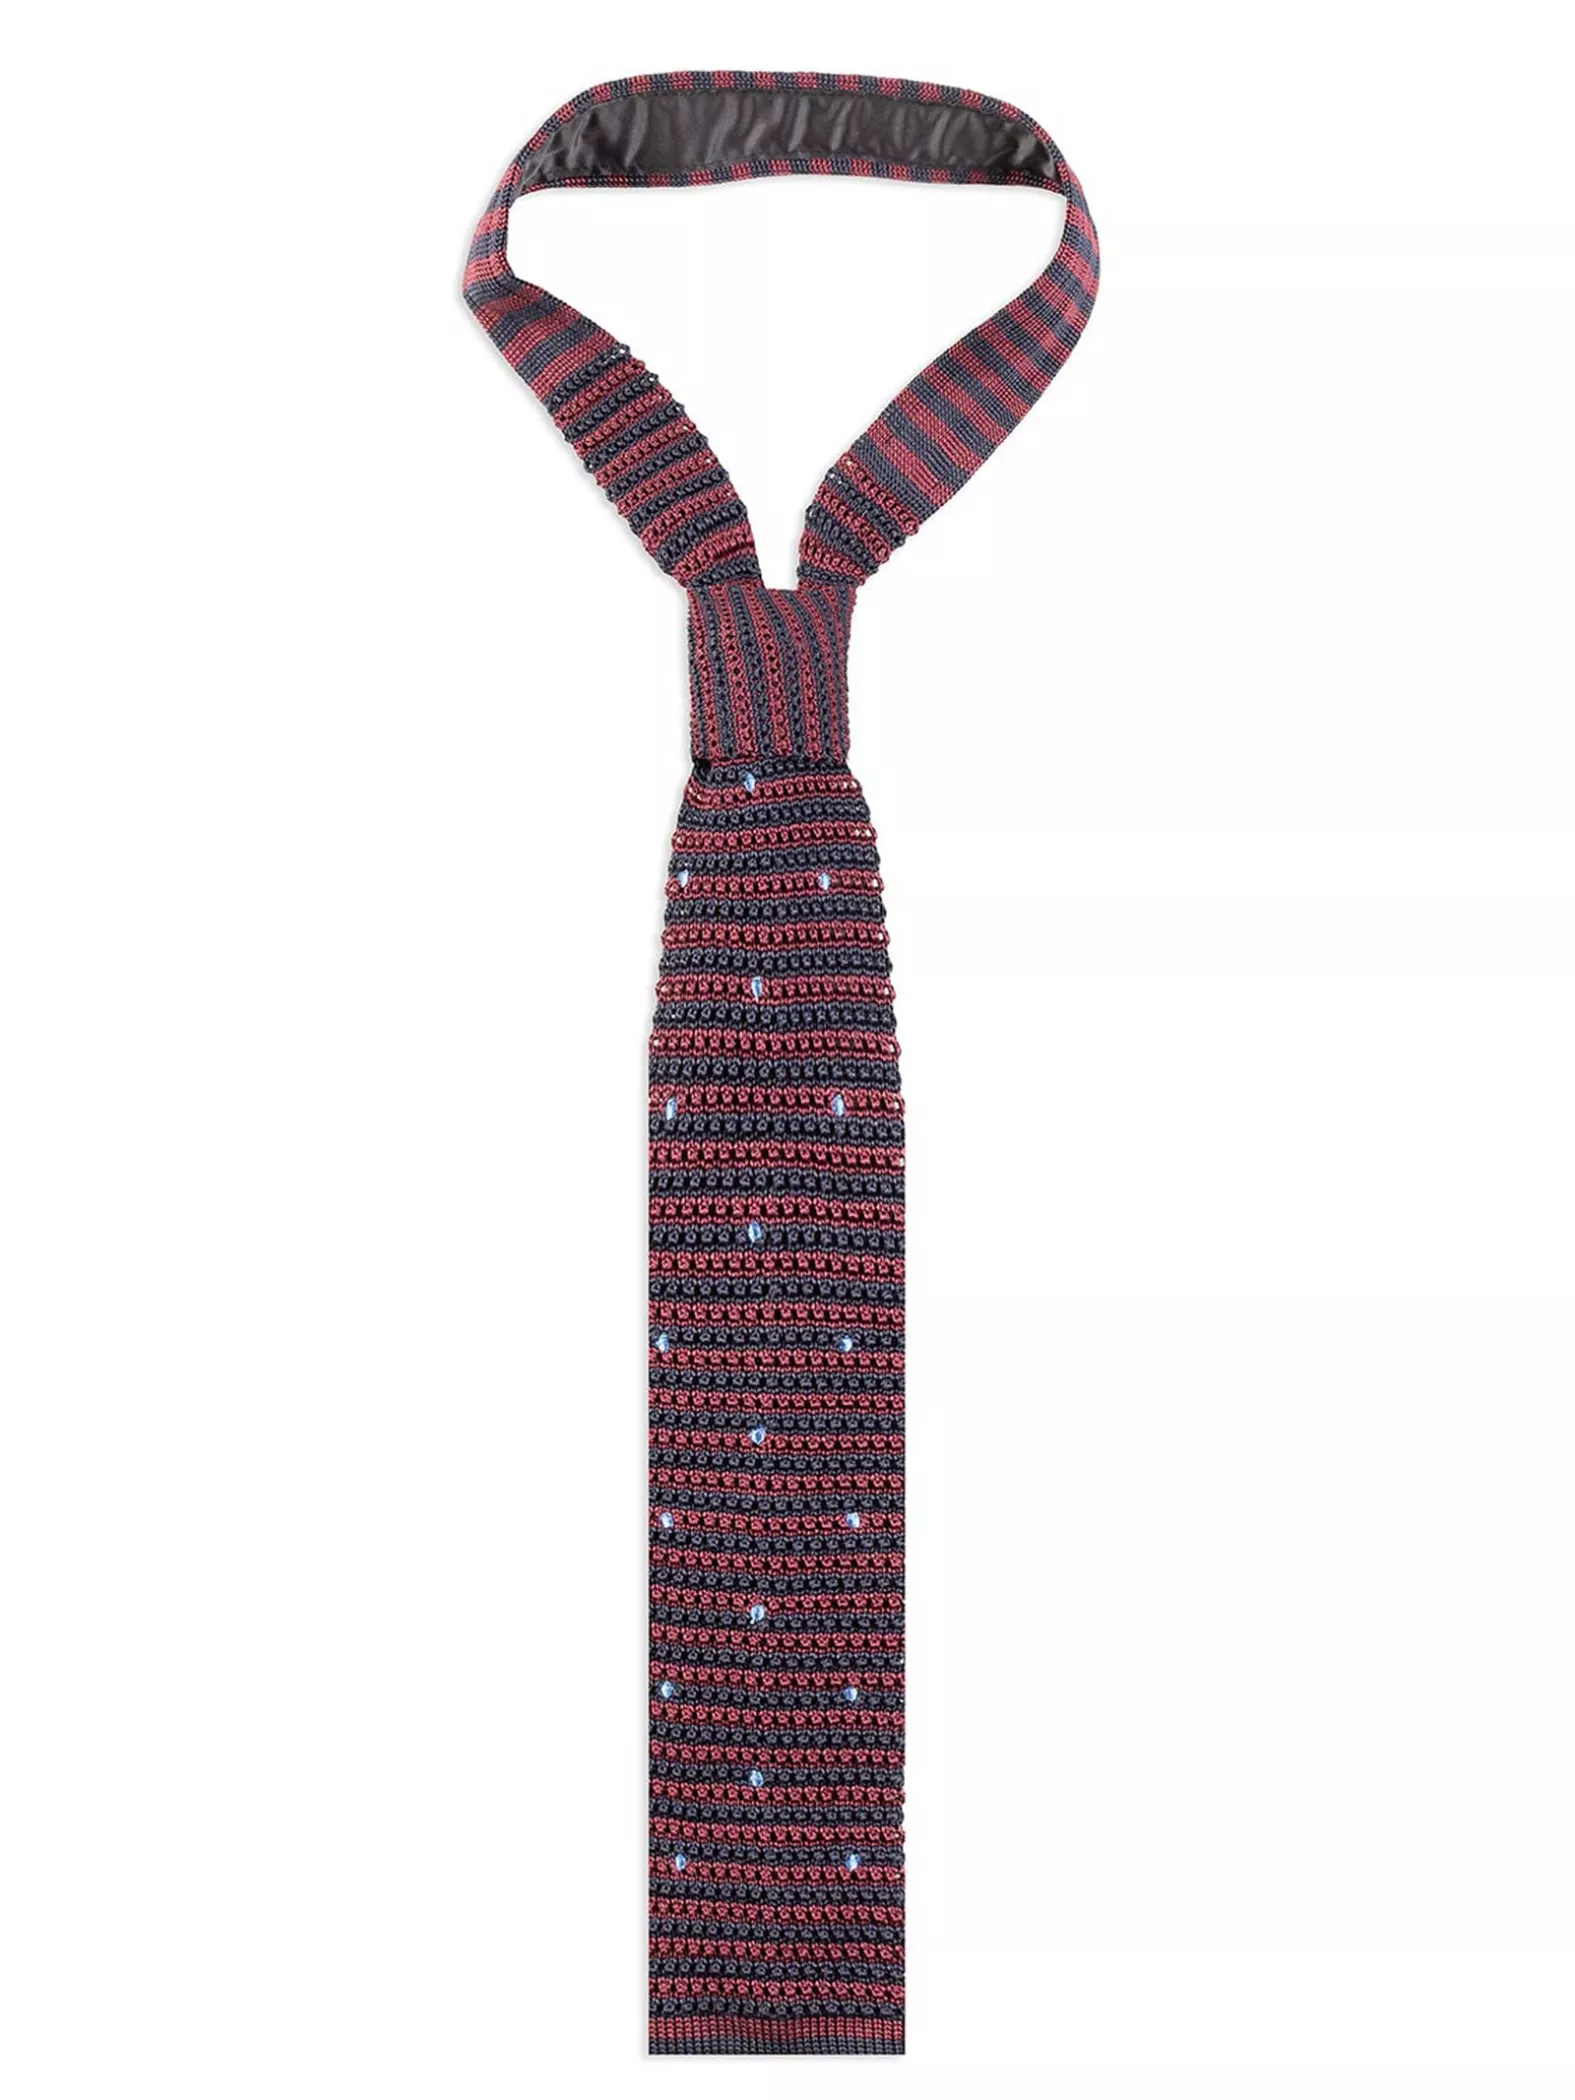 Refined Silk Men's Tie with Stripes and Polka Dots Pattern, Square Tip